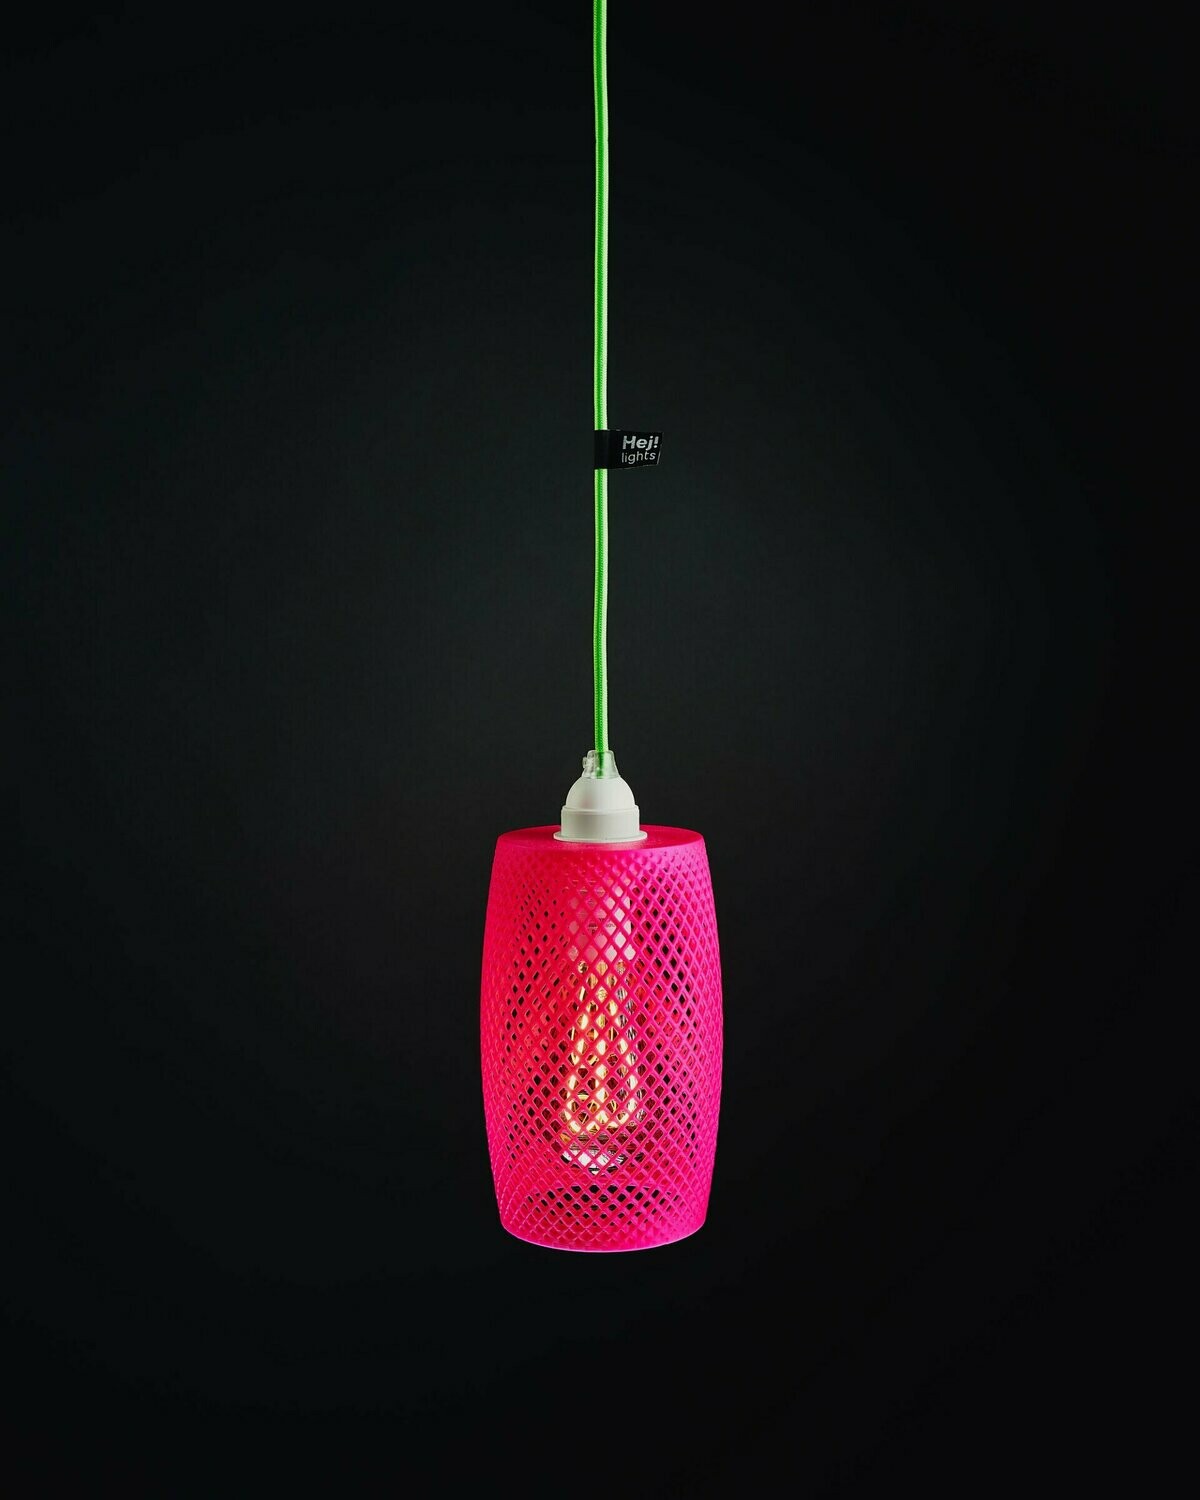 Hej! lights gustave neon pink (Special Editon)